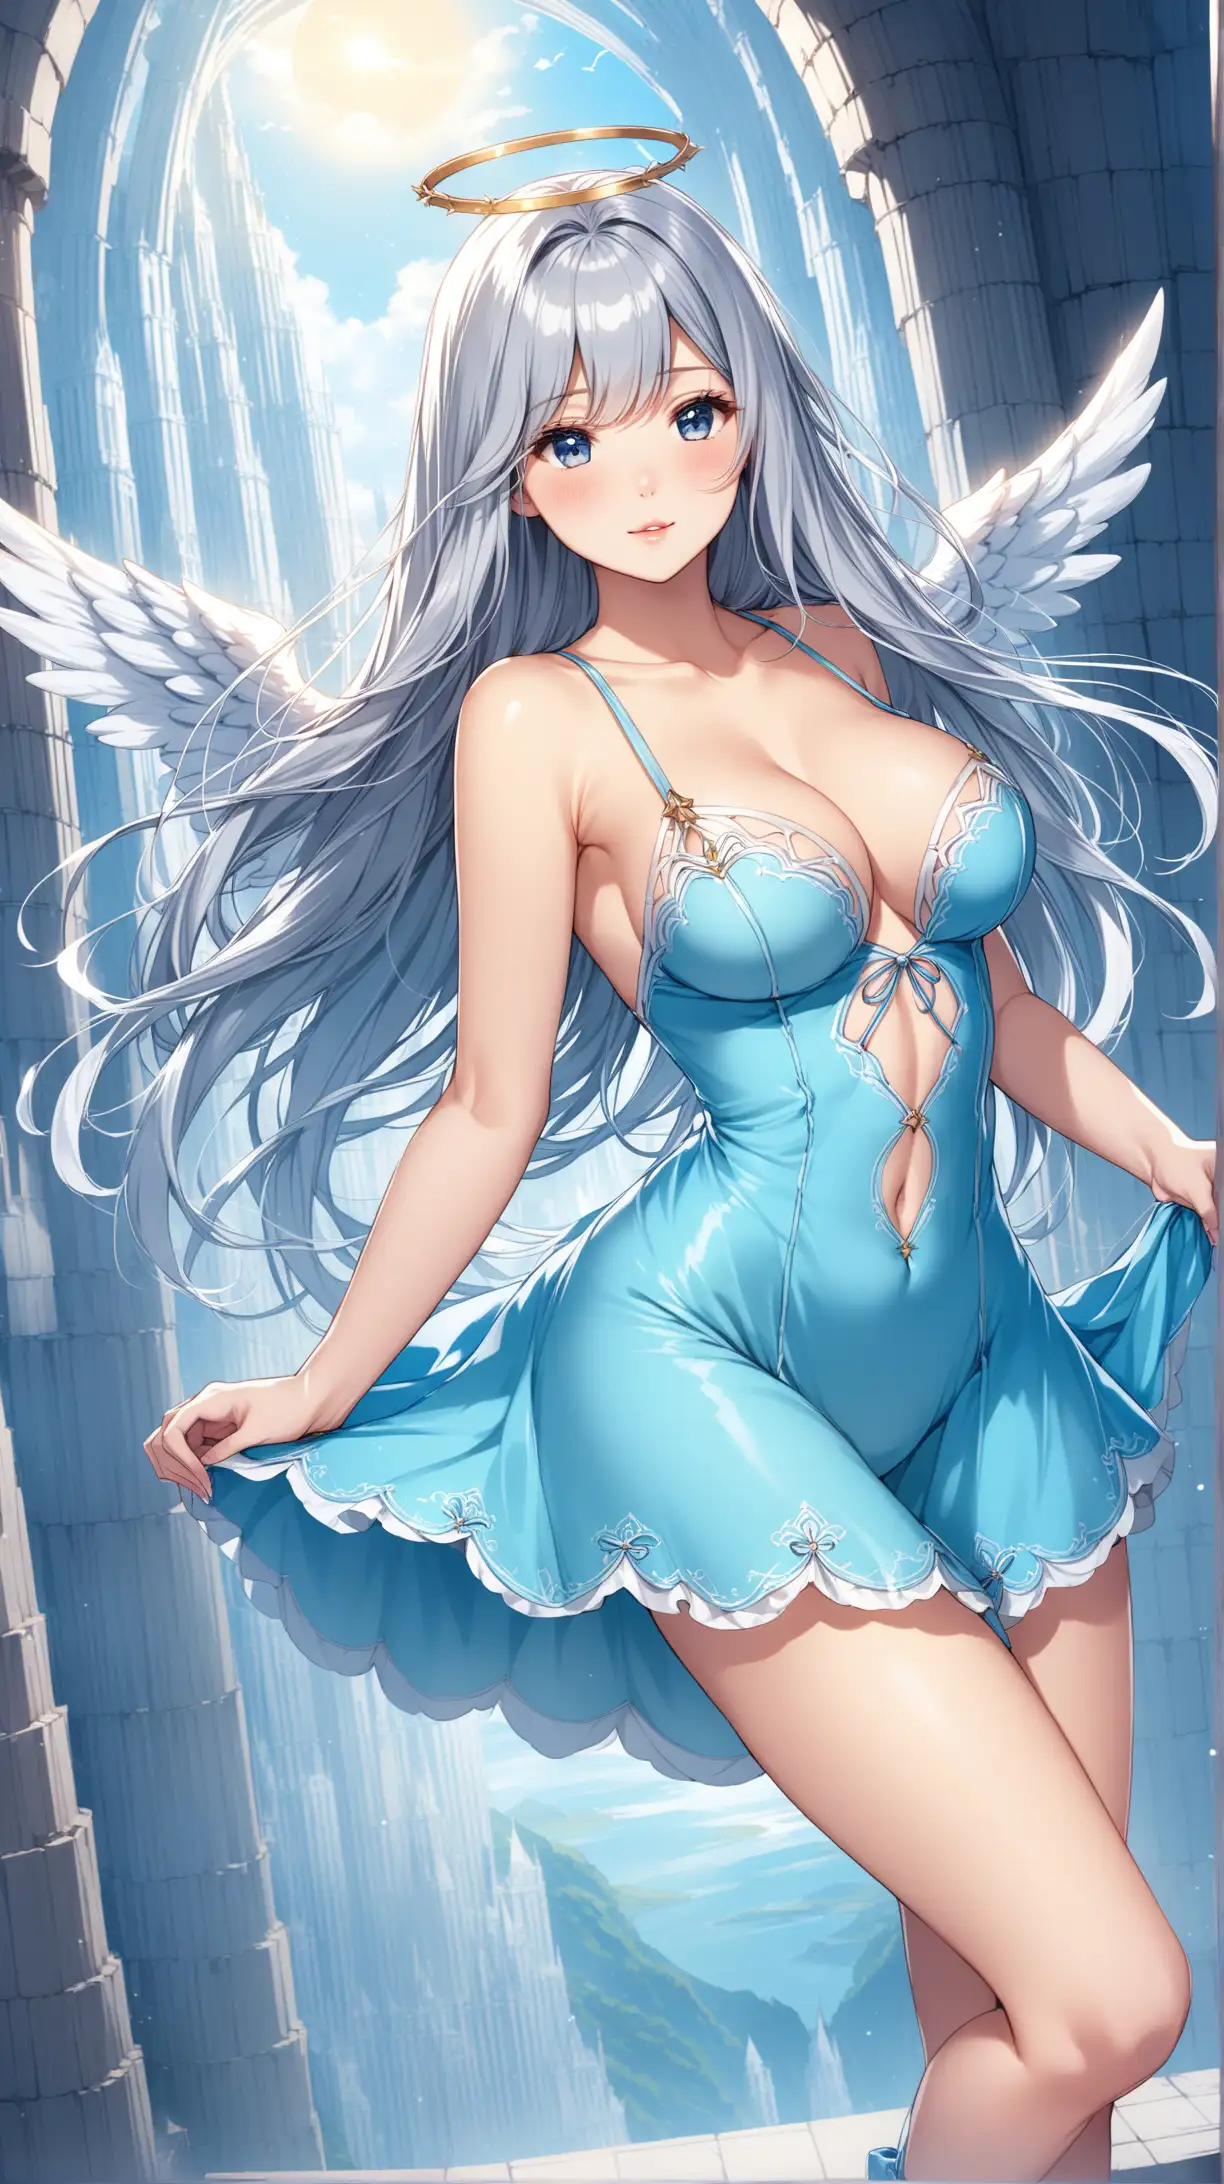 Ethereal Angels Stunning Women in Mesmerizing Blue Dresses